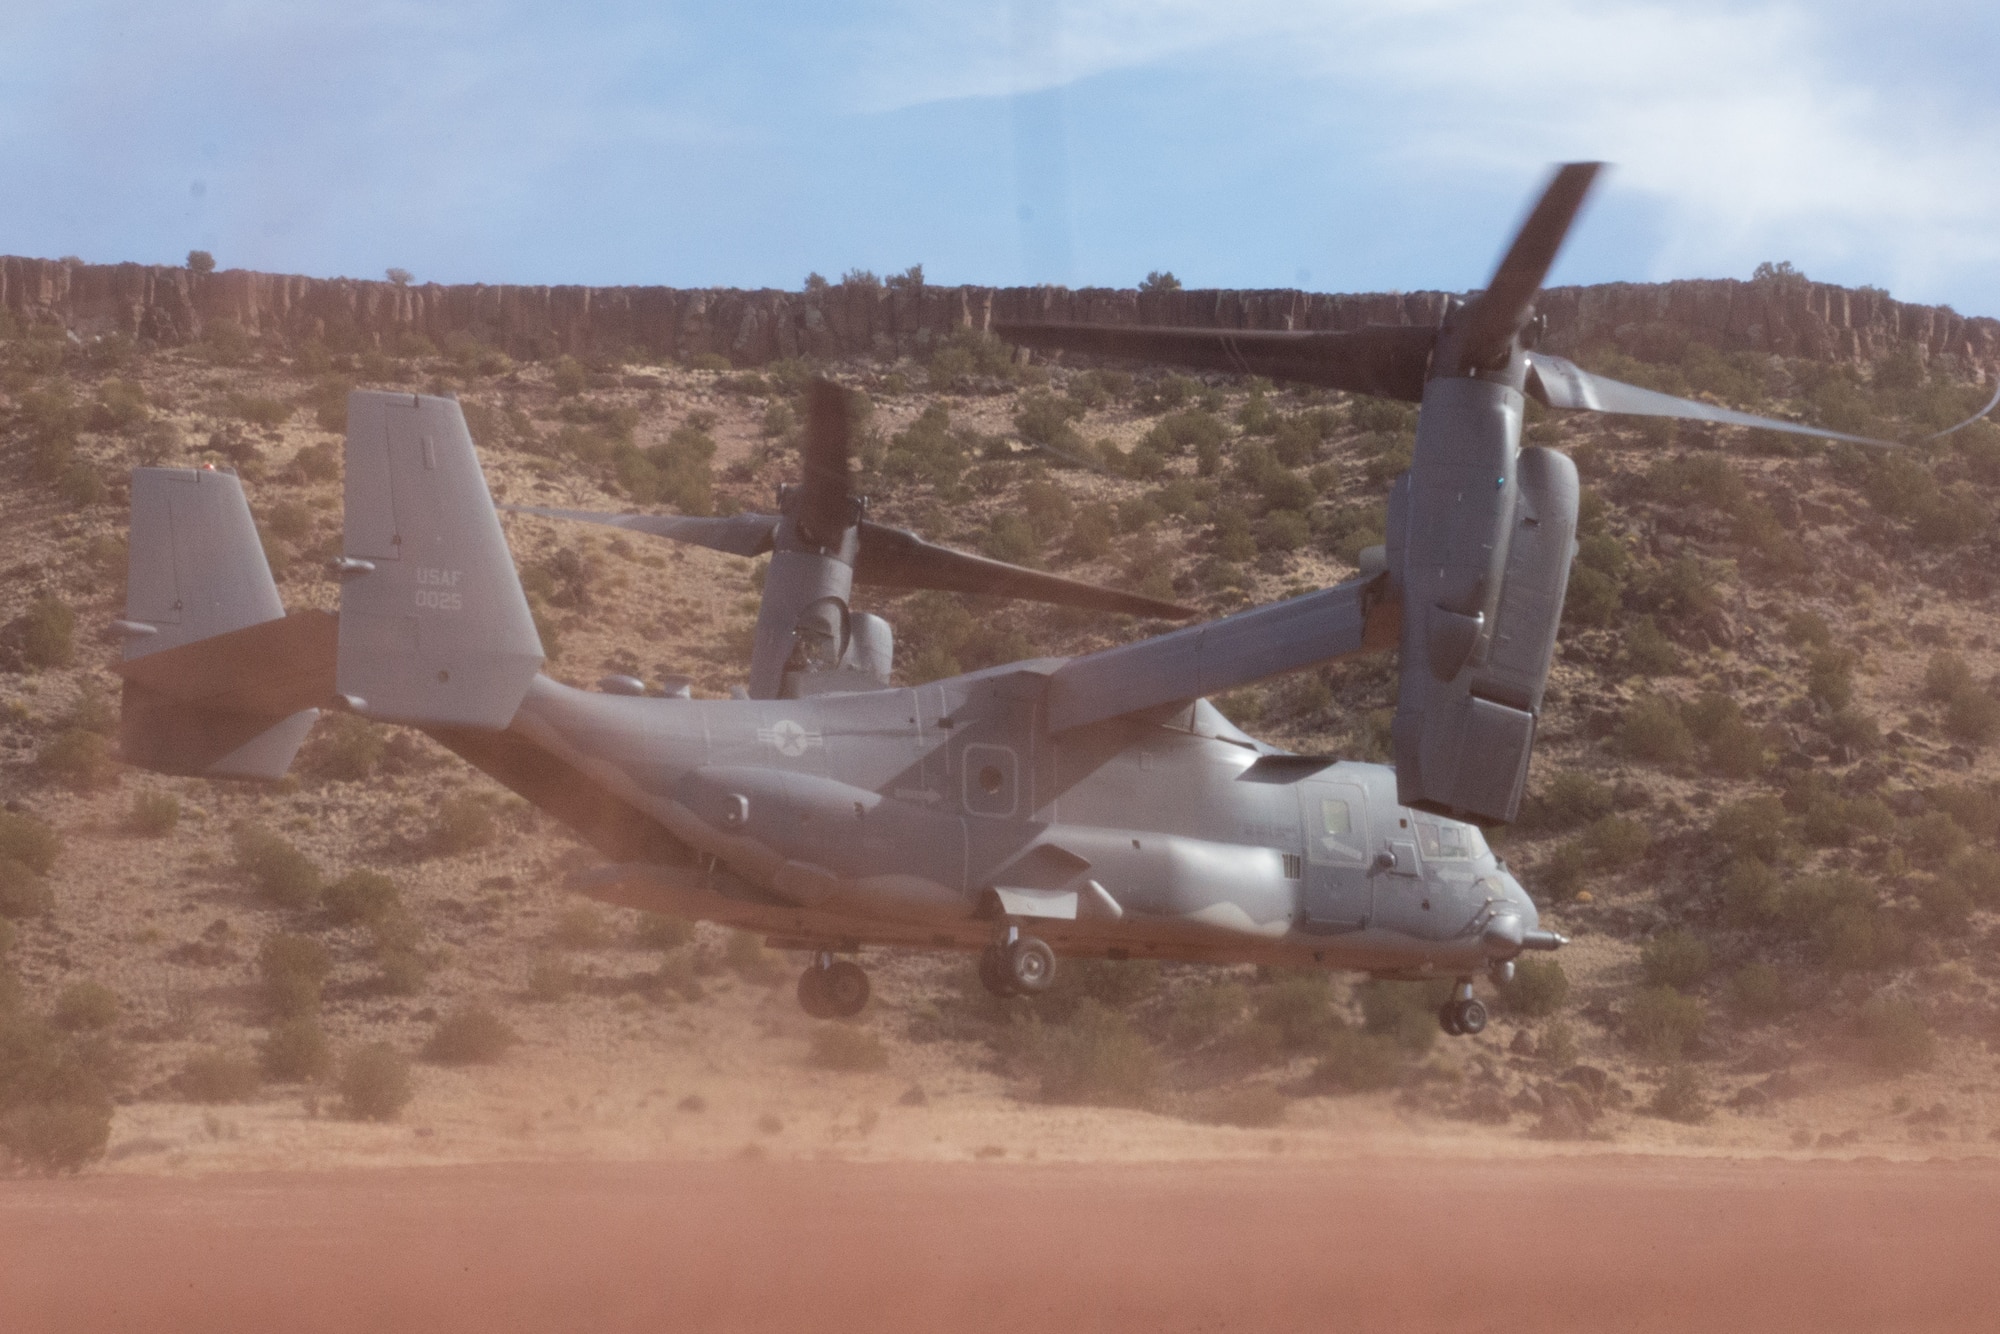 A CV-22 Takes off as red sand flies around it